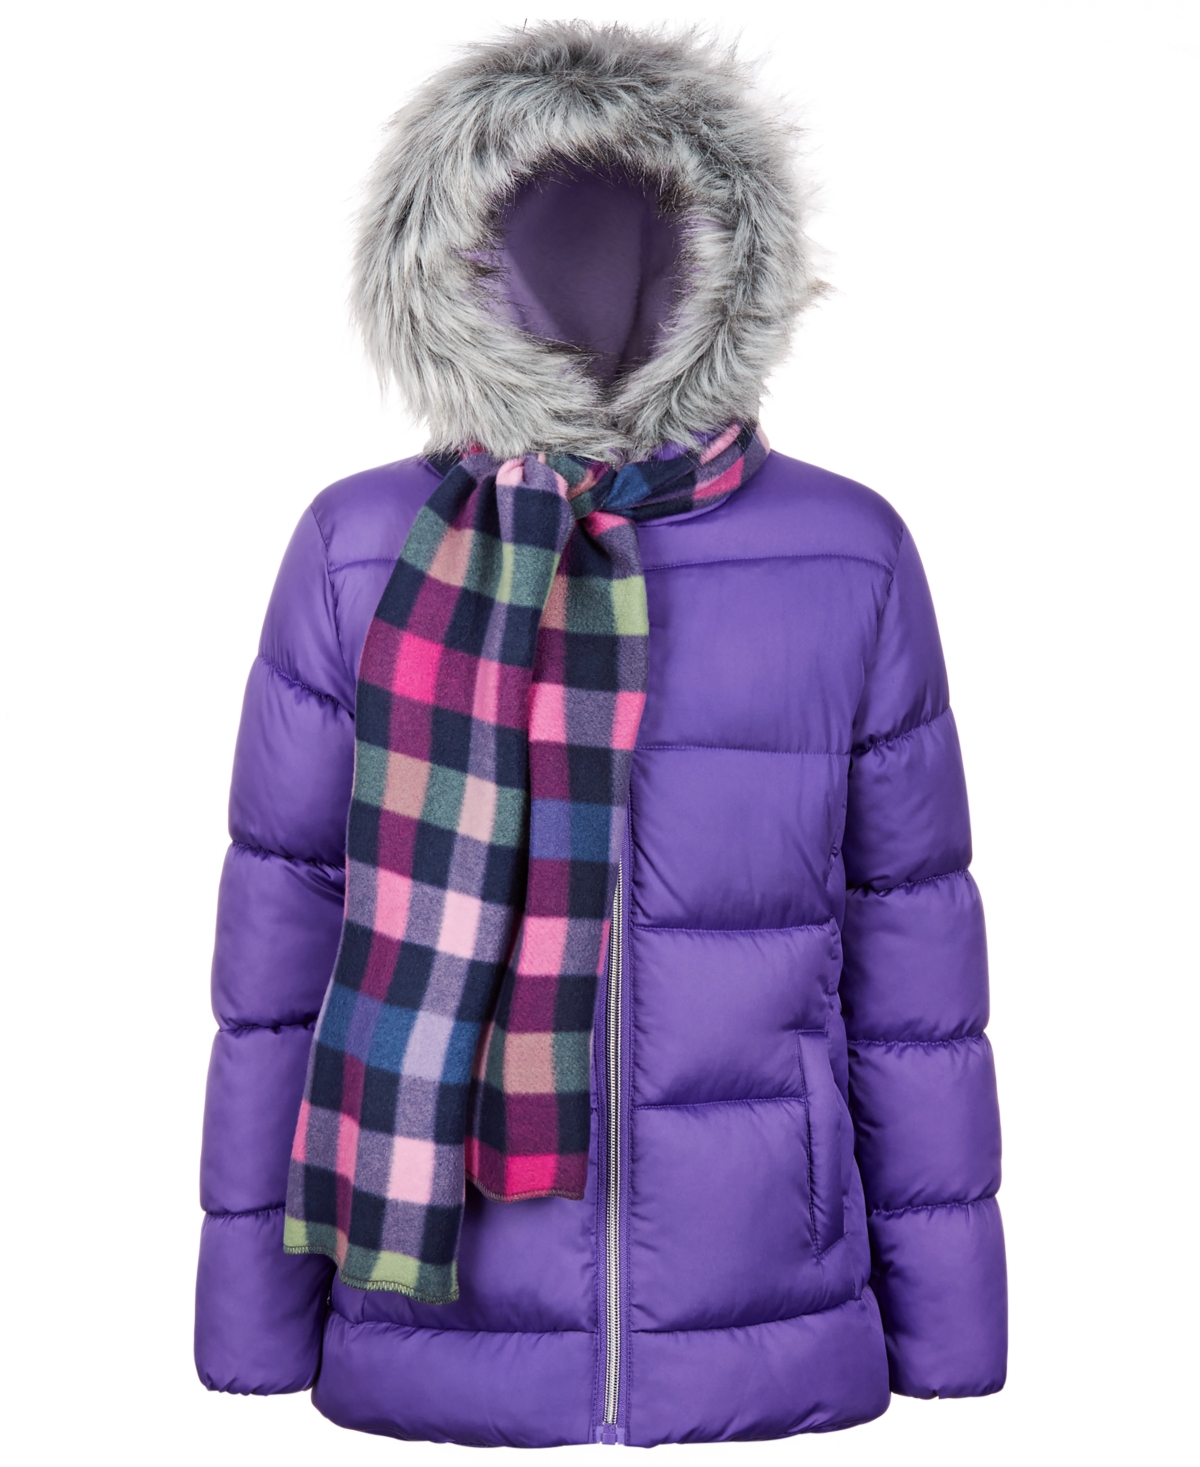 S Rothschild & Co Big Girls Solid Quilt Puffer Coat & Plaid Scarf In Lavender